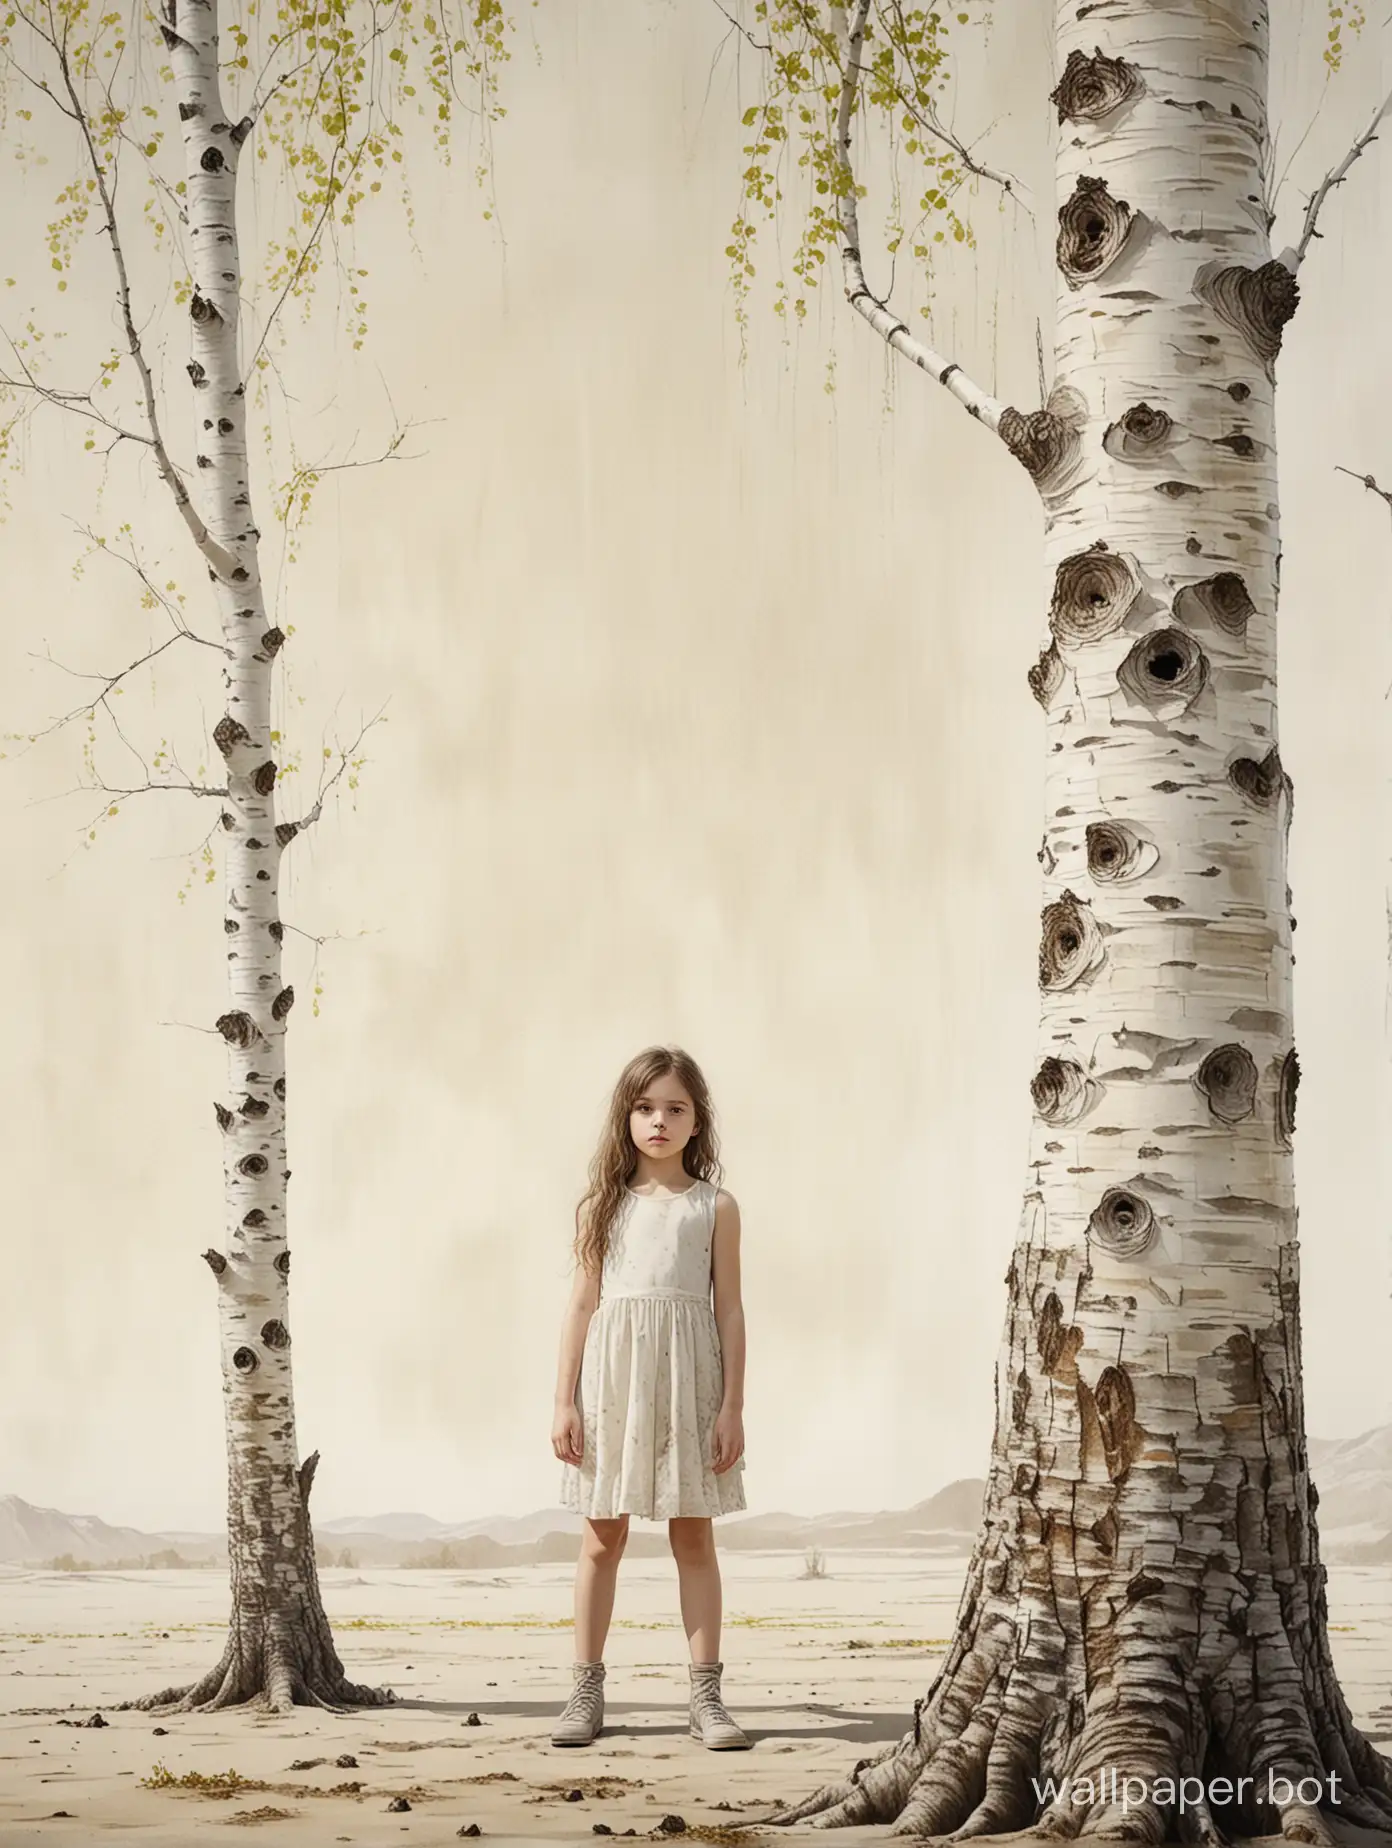 oil painting, watercolor ink, adorable 14 year old girl stands by a birch tree on a grunge sand, lime and creamy white background, triple exposure, perfect fingers, perfect body, flawless composition, Isao Andrews, Tim Burton, Leonardo da Vinci, dynamic light and shadow, hyperrealistic